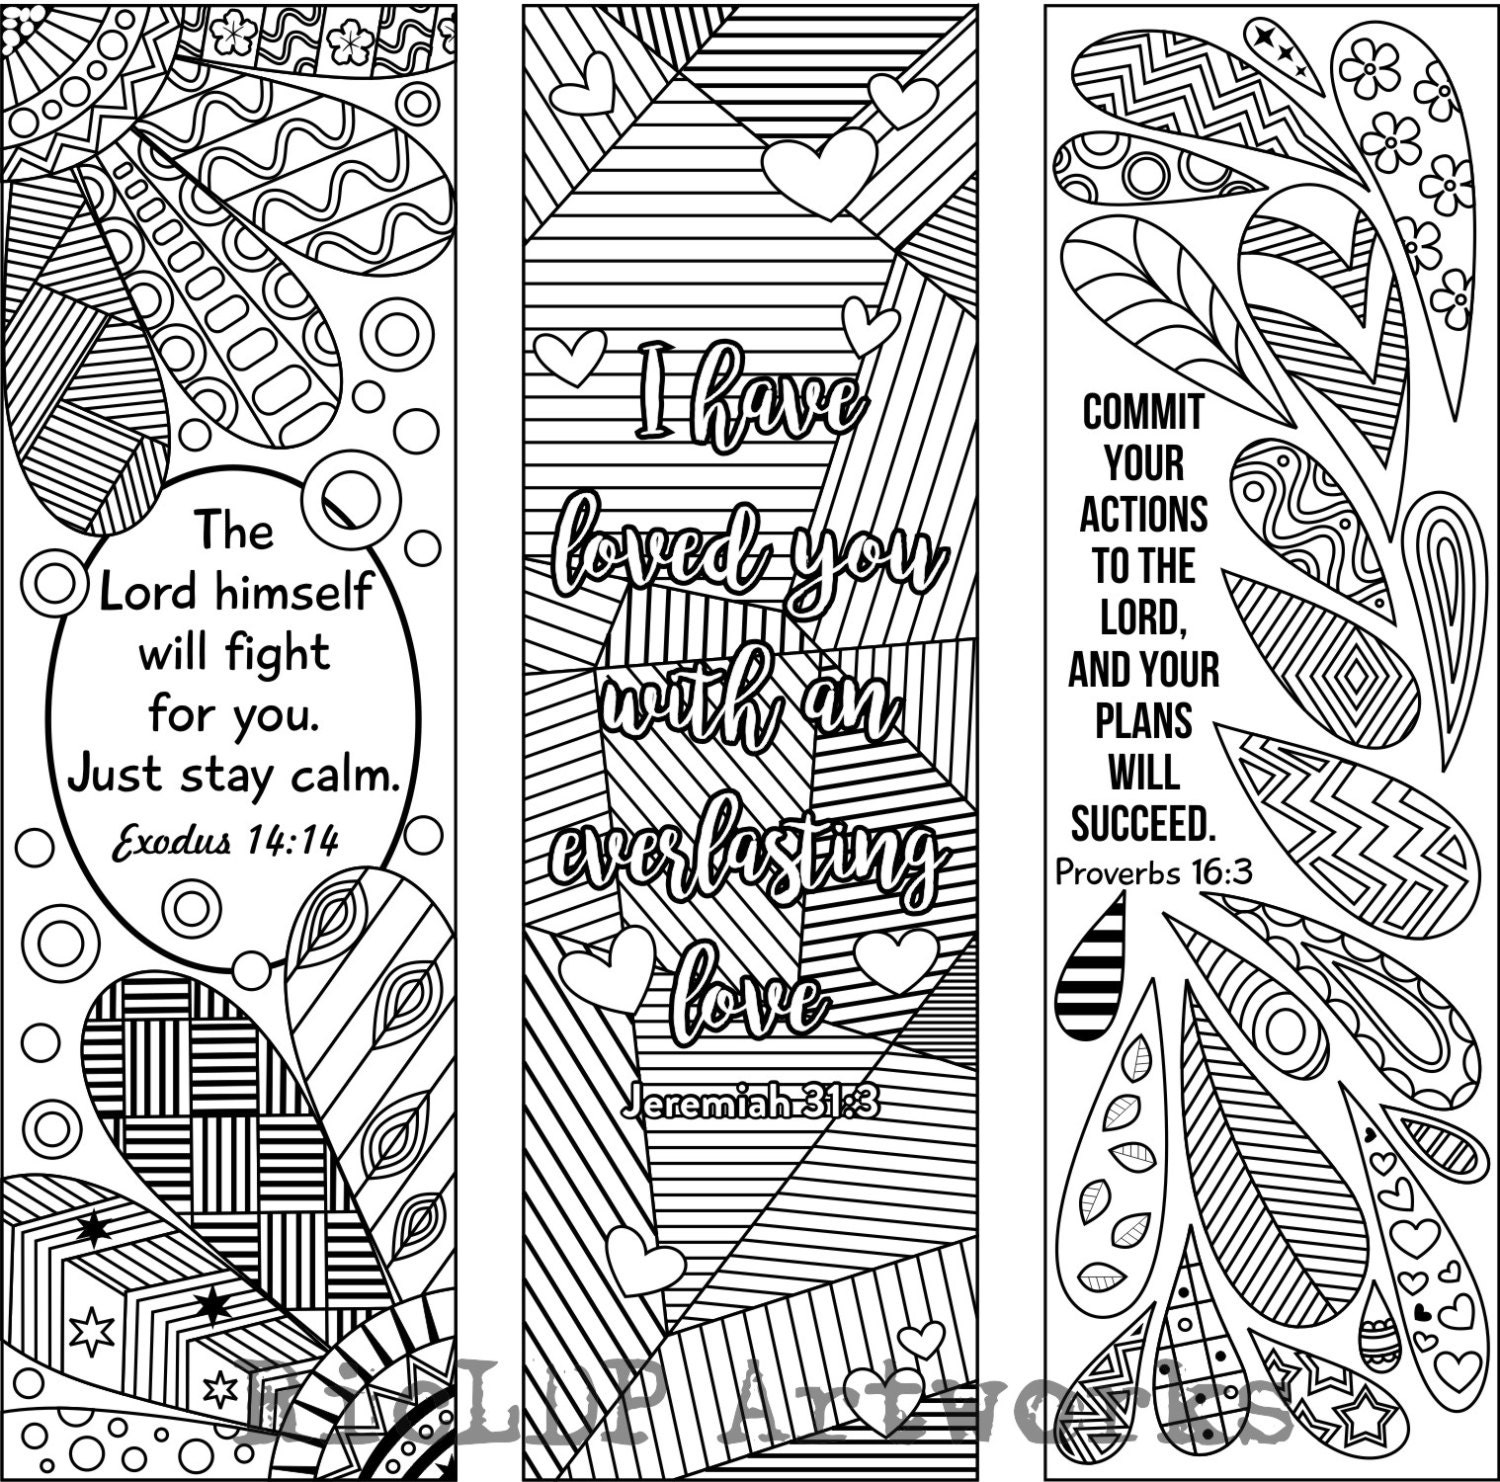 6 bible verse coloring bookmarks plus 3 designs with blank